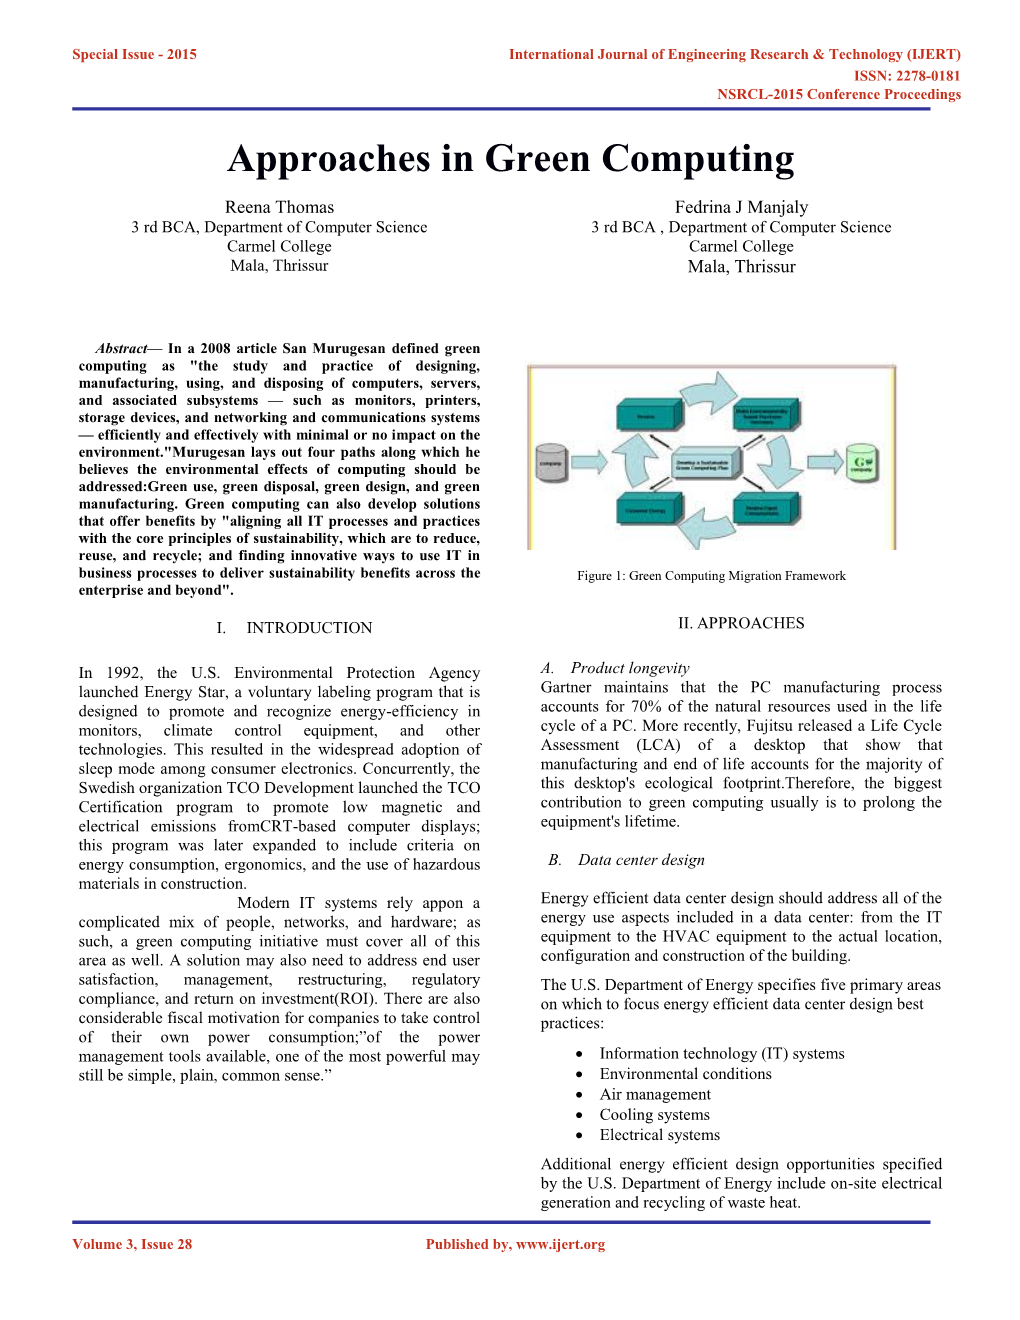 Approaches in Green Computing